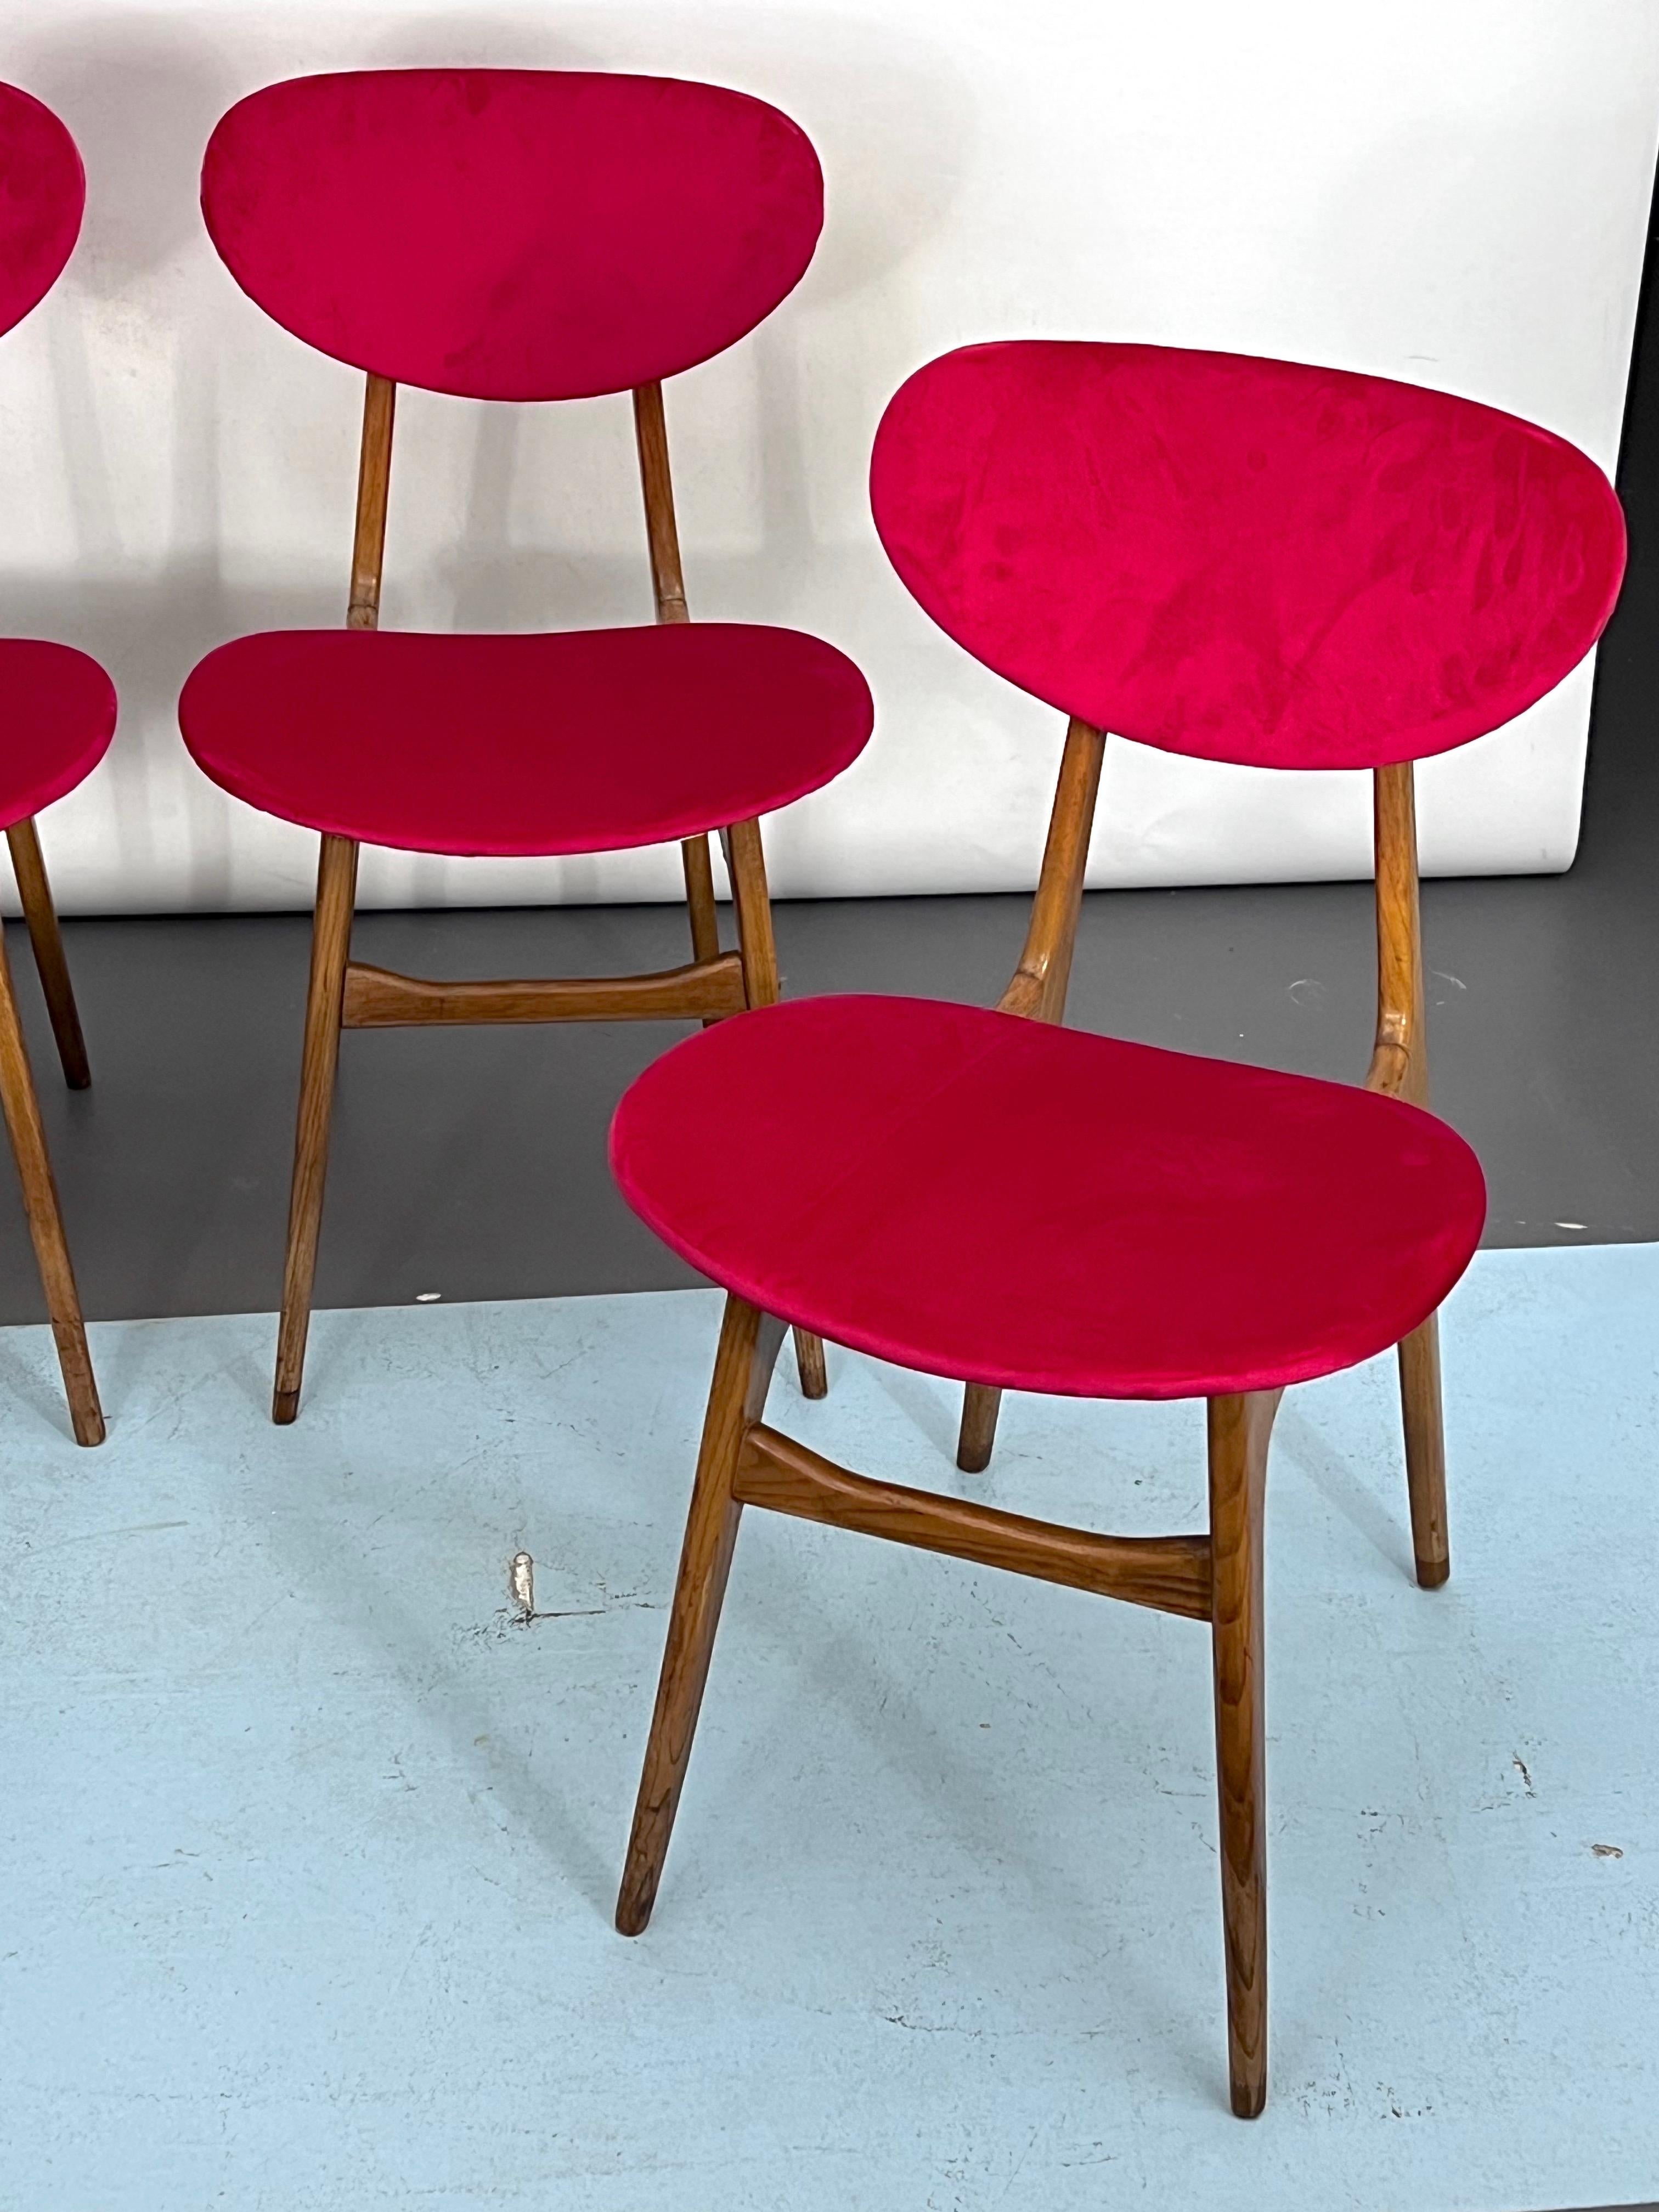 Italian Mid-Century Set of Four Red Velvet and Wood Dining Chairs, Italy, 1950s For Sale